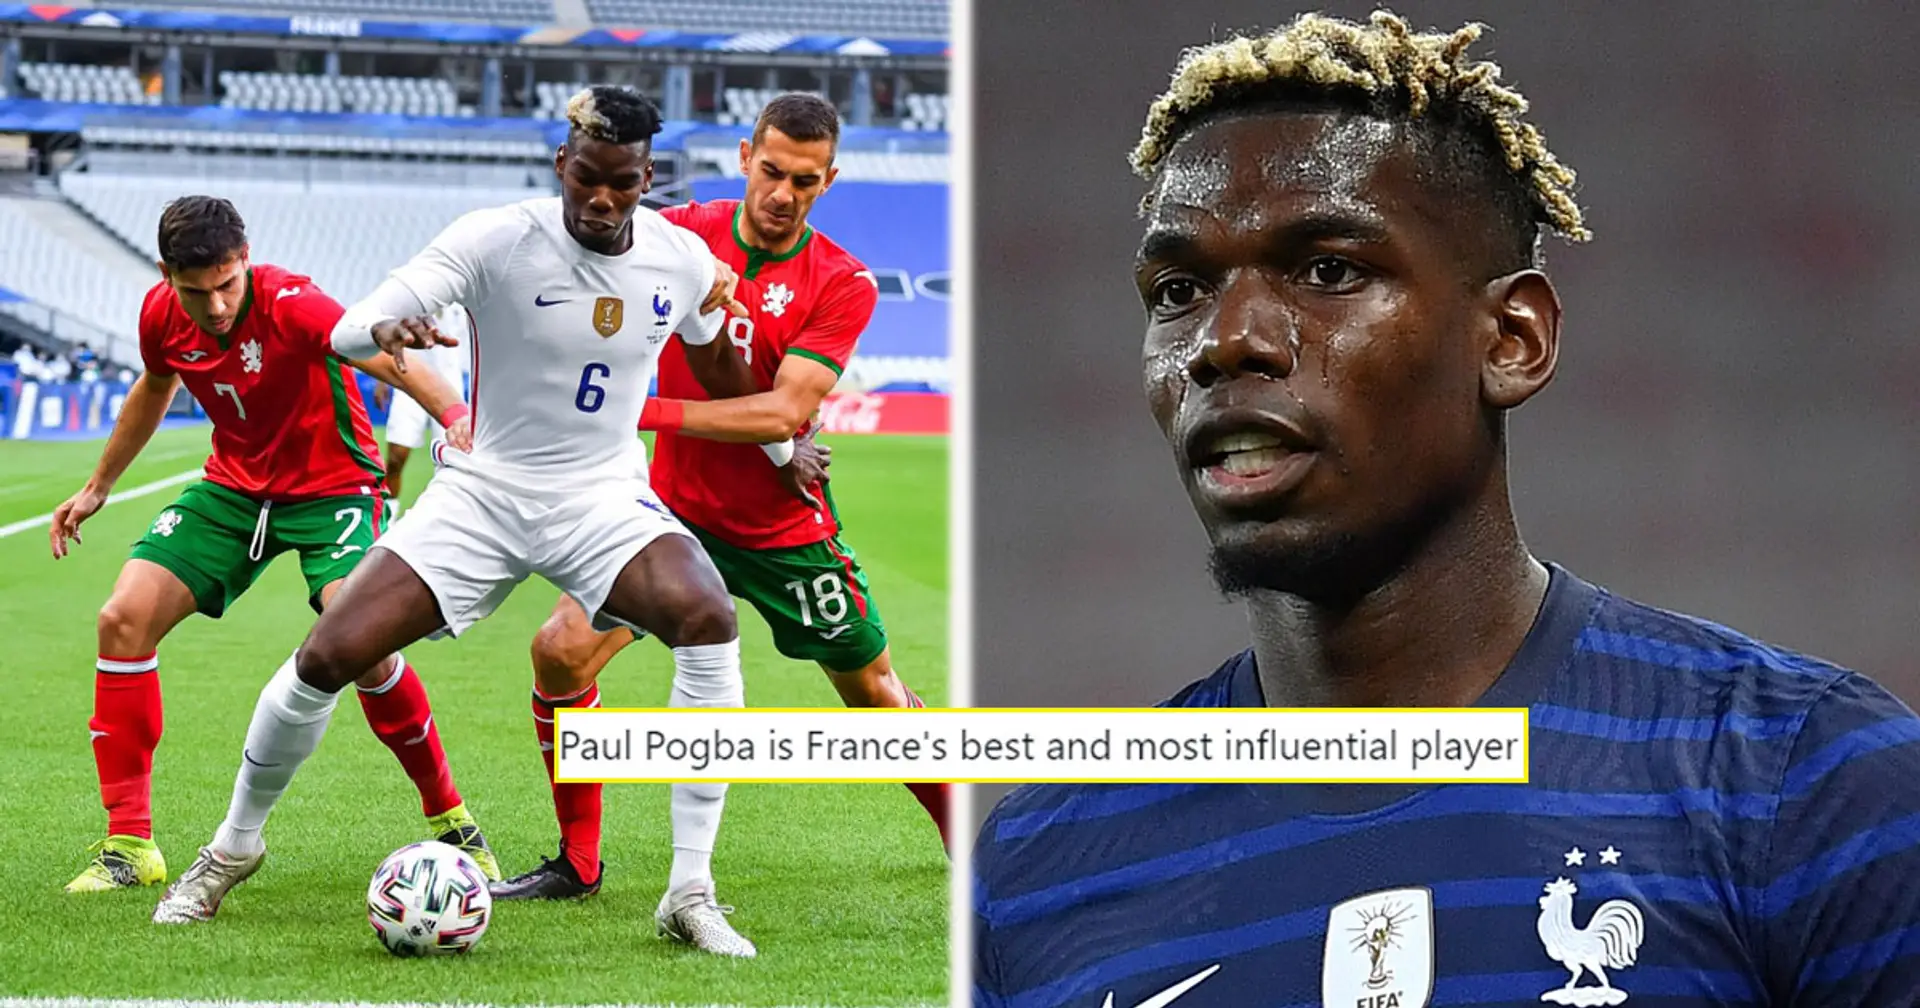 Pogba dazzles for France in pre-Euro friendly - and United fans can't stop raving about it